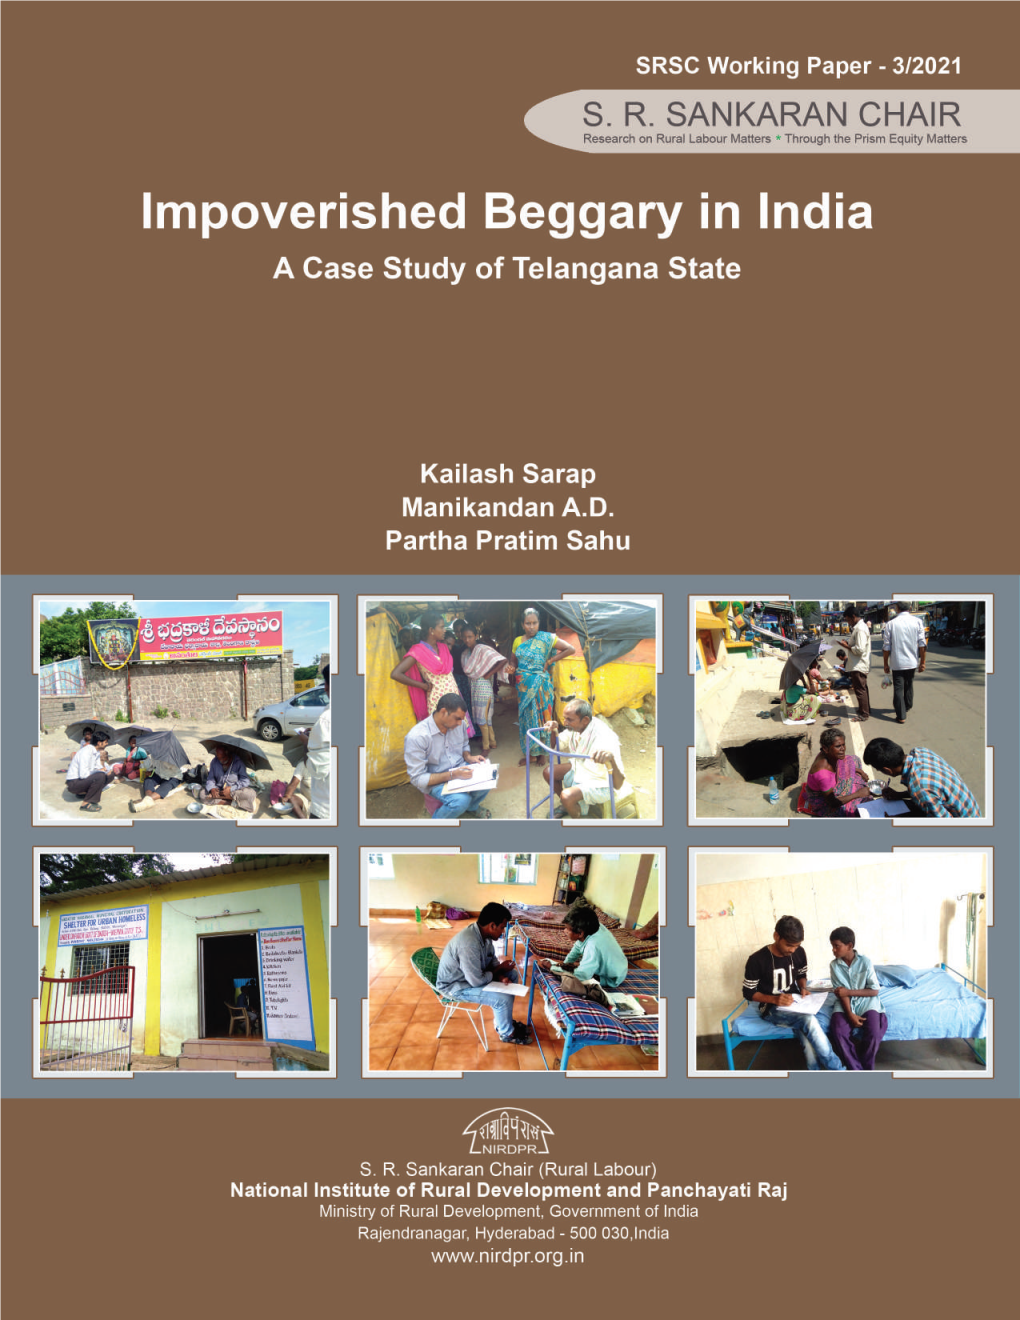 Impoverished Beggary in India: a Case Study of Telangana State